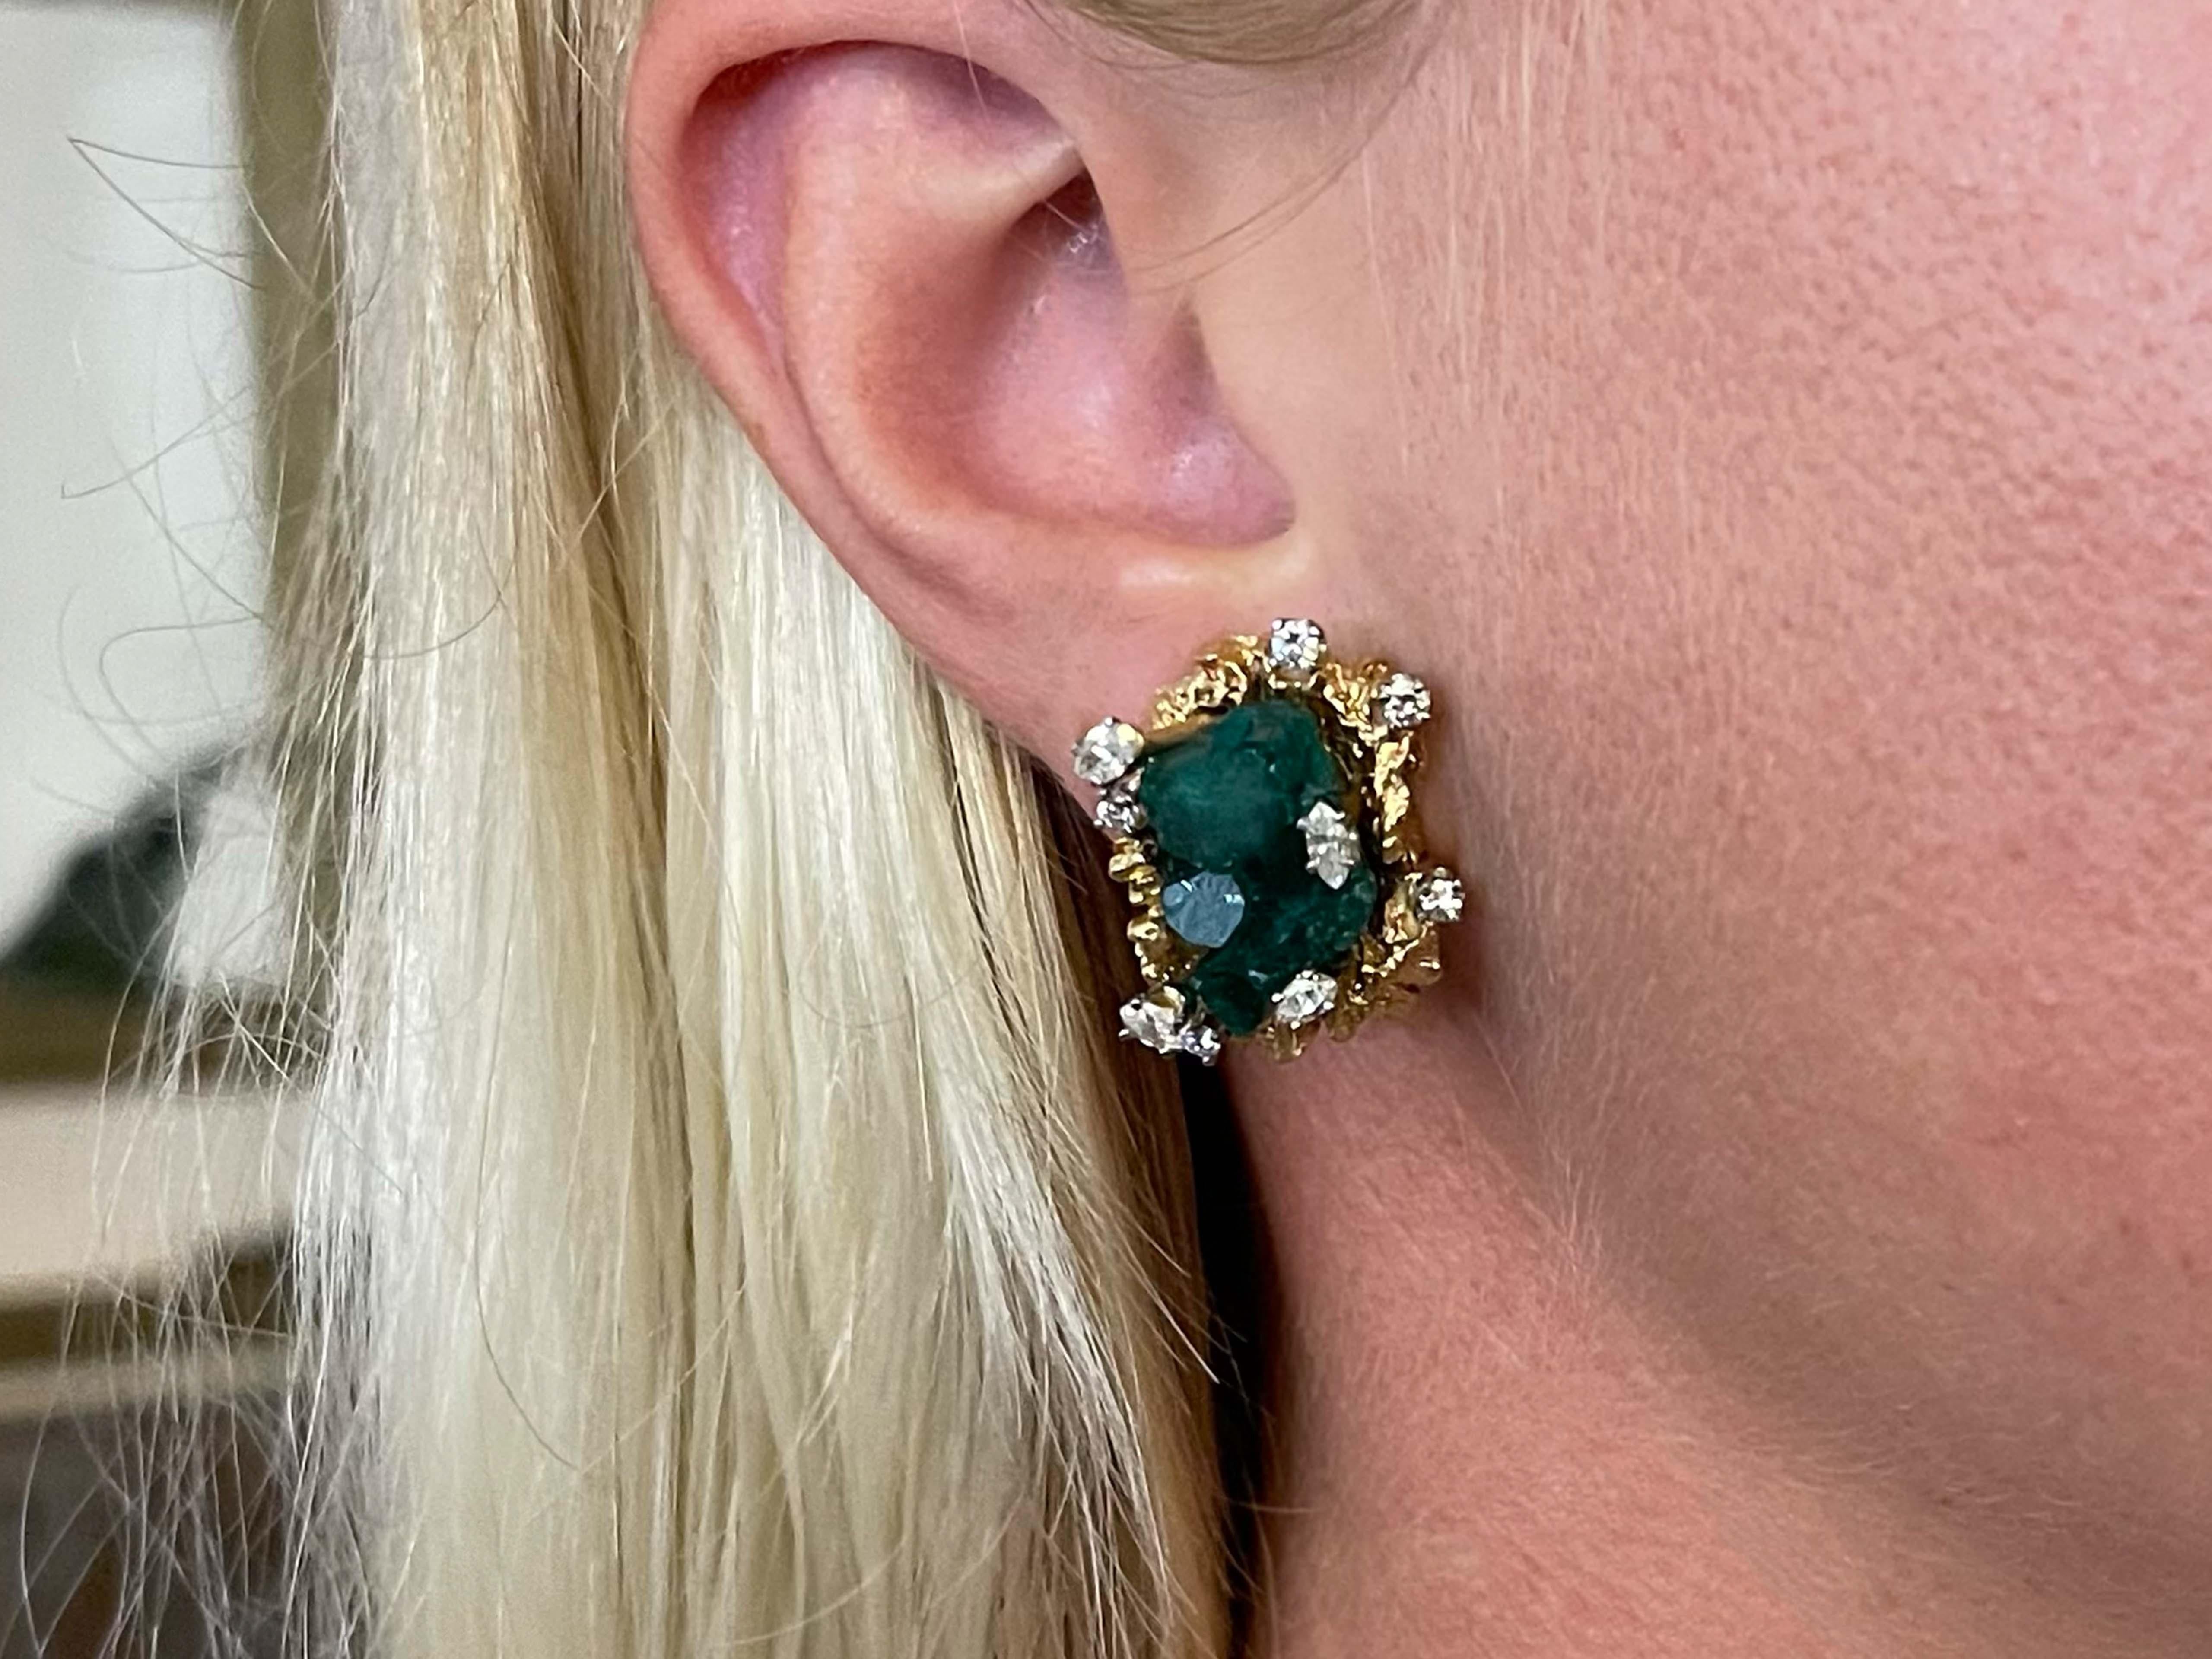 Earrings Specifications:

Metal: 14K Yellow Gold

Total Weight: 22.3 Grams
​
​Earring Length: 26 mm

Gemstone: Chatham emerald

Diamond Color: G-I

Diamond Clarity: VS1-SI1

Diamond Carat Weight: 1.40 carat

Stamped: 